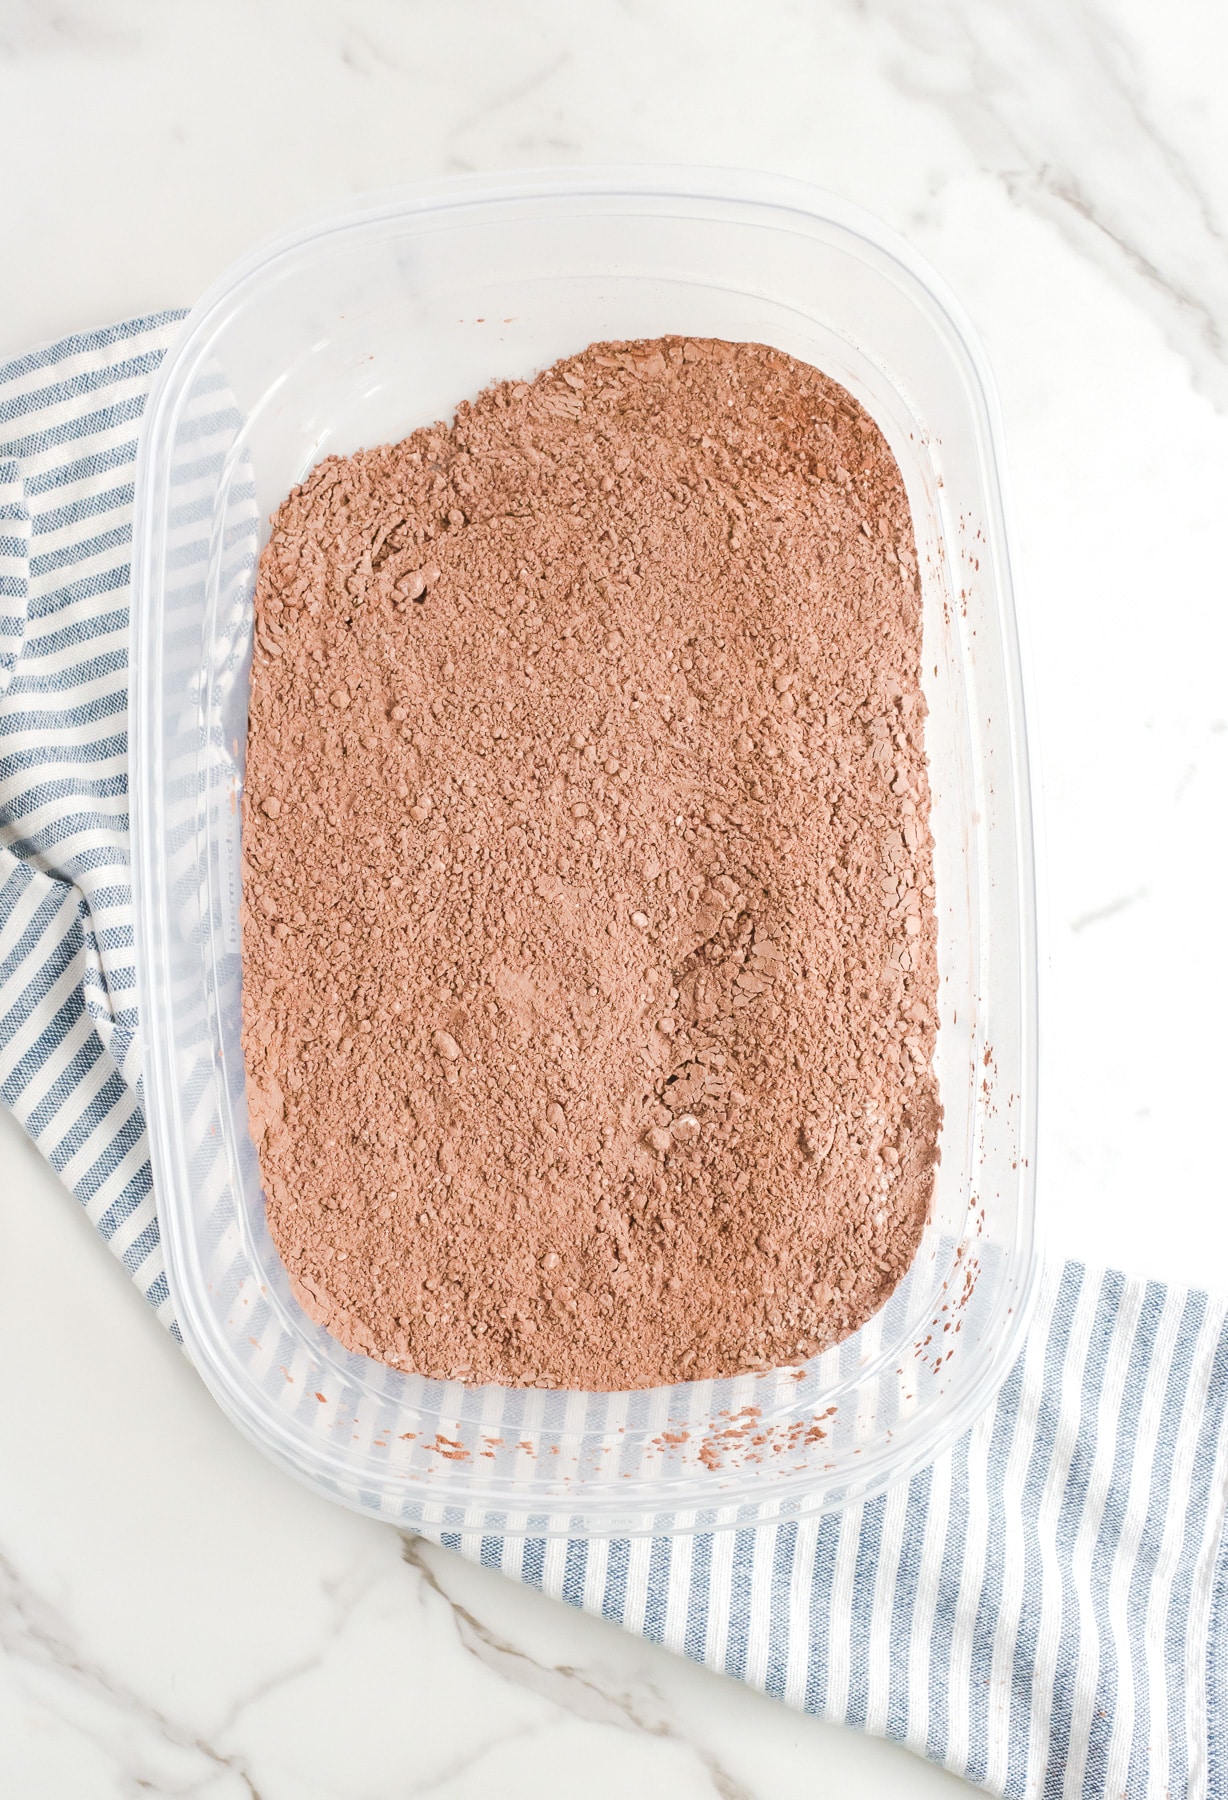 A plastic container with chocolate and powdered sugar mixed together in it.